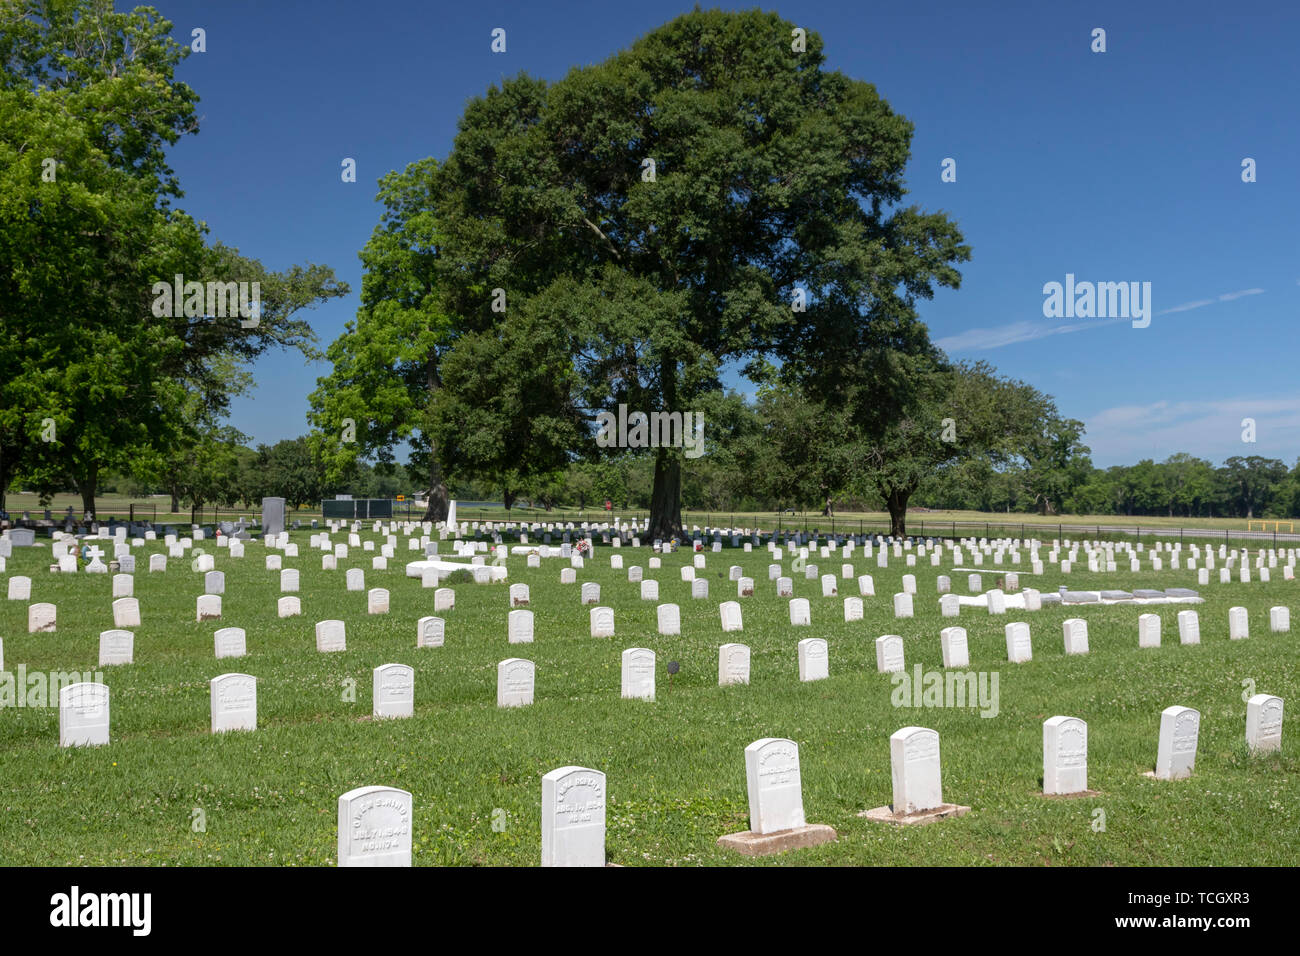 Carville, Louisiana - The cemetery at the National Hansen's Disease Museum. Once a facility where people with Hansen's Disease (leprosy) were quaranti Stock Photo